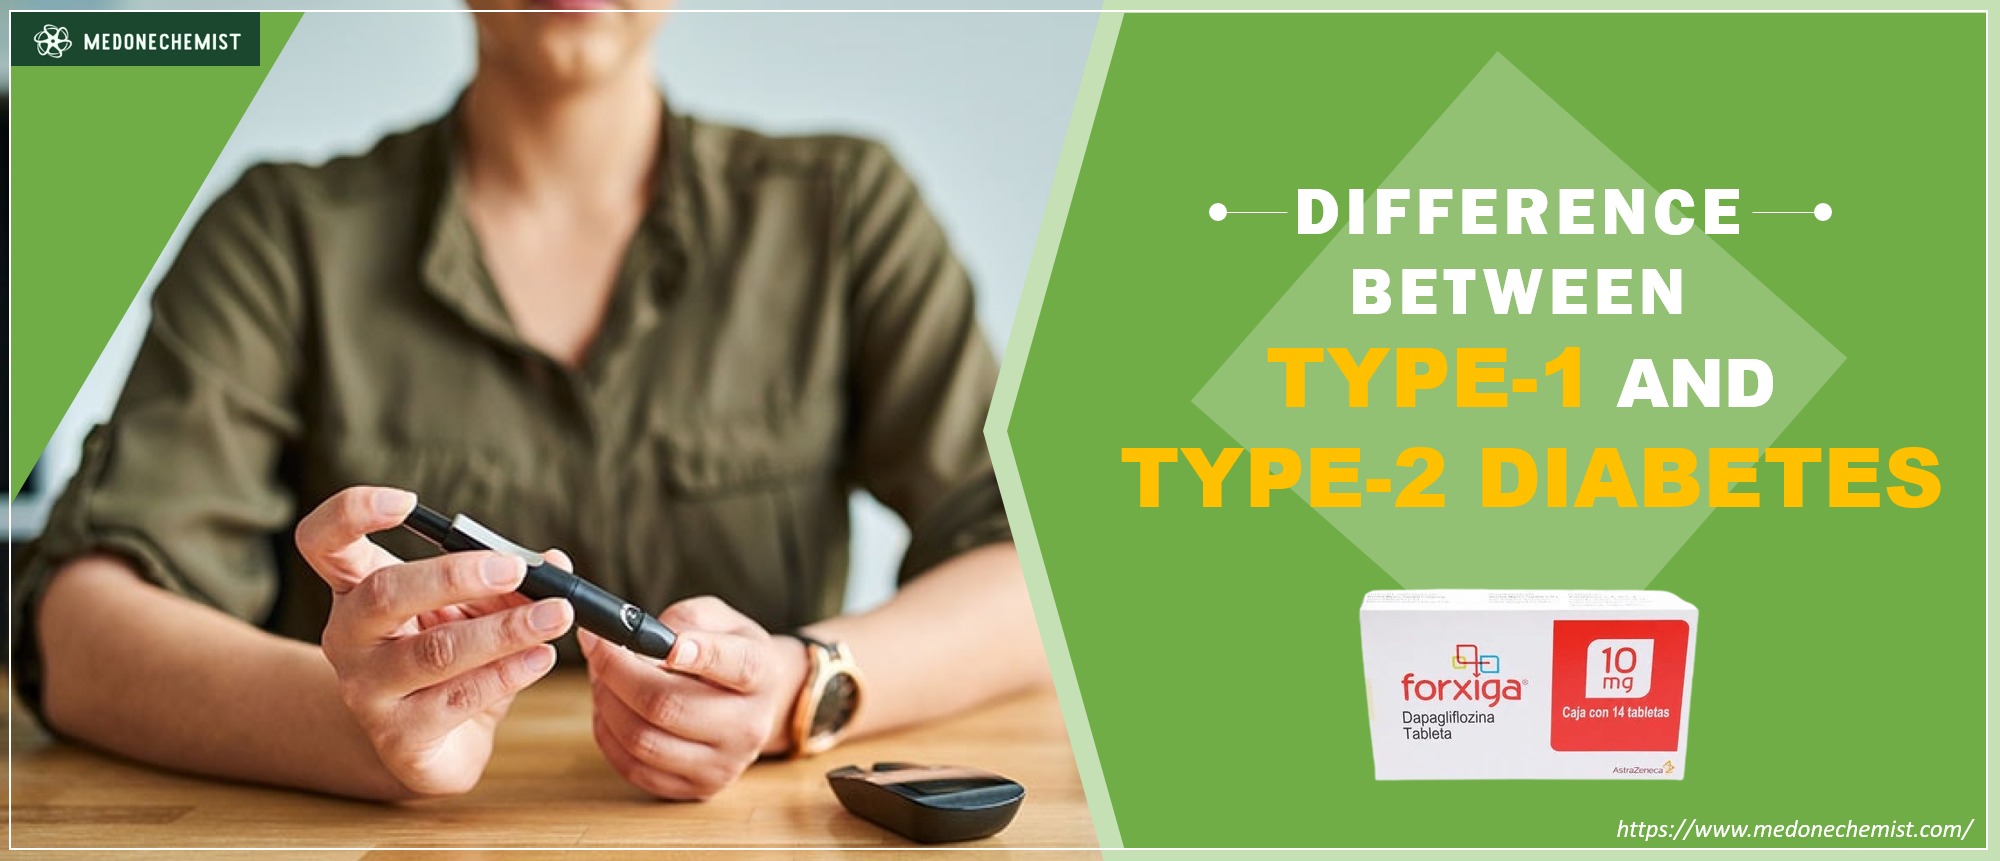 Difference between type-1 and type-2 diabetes